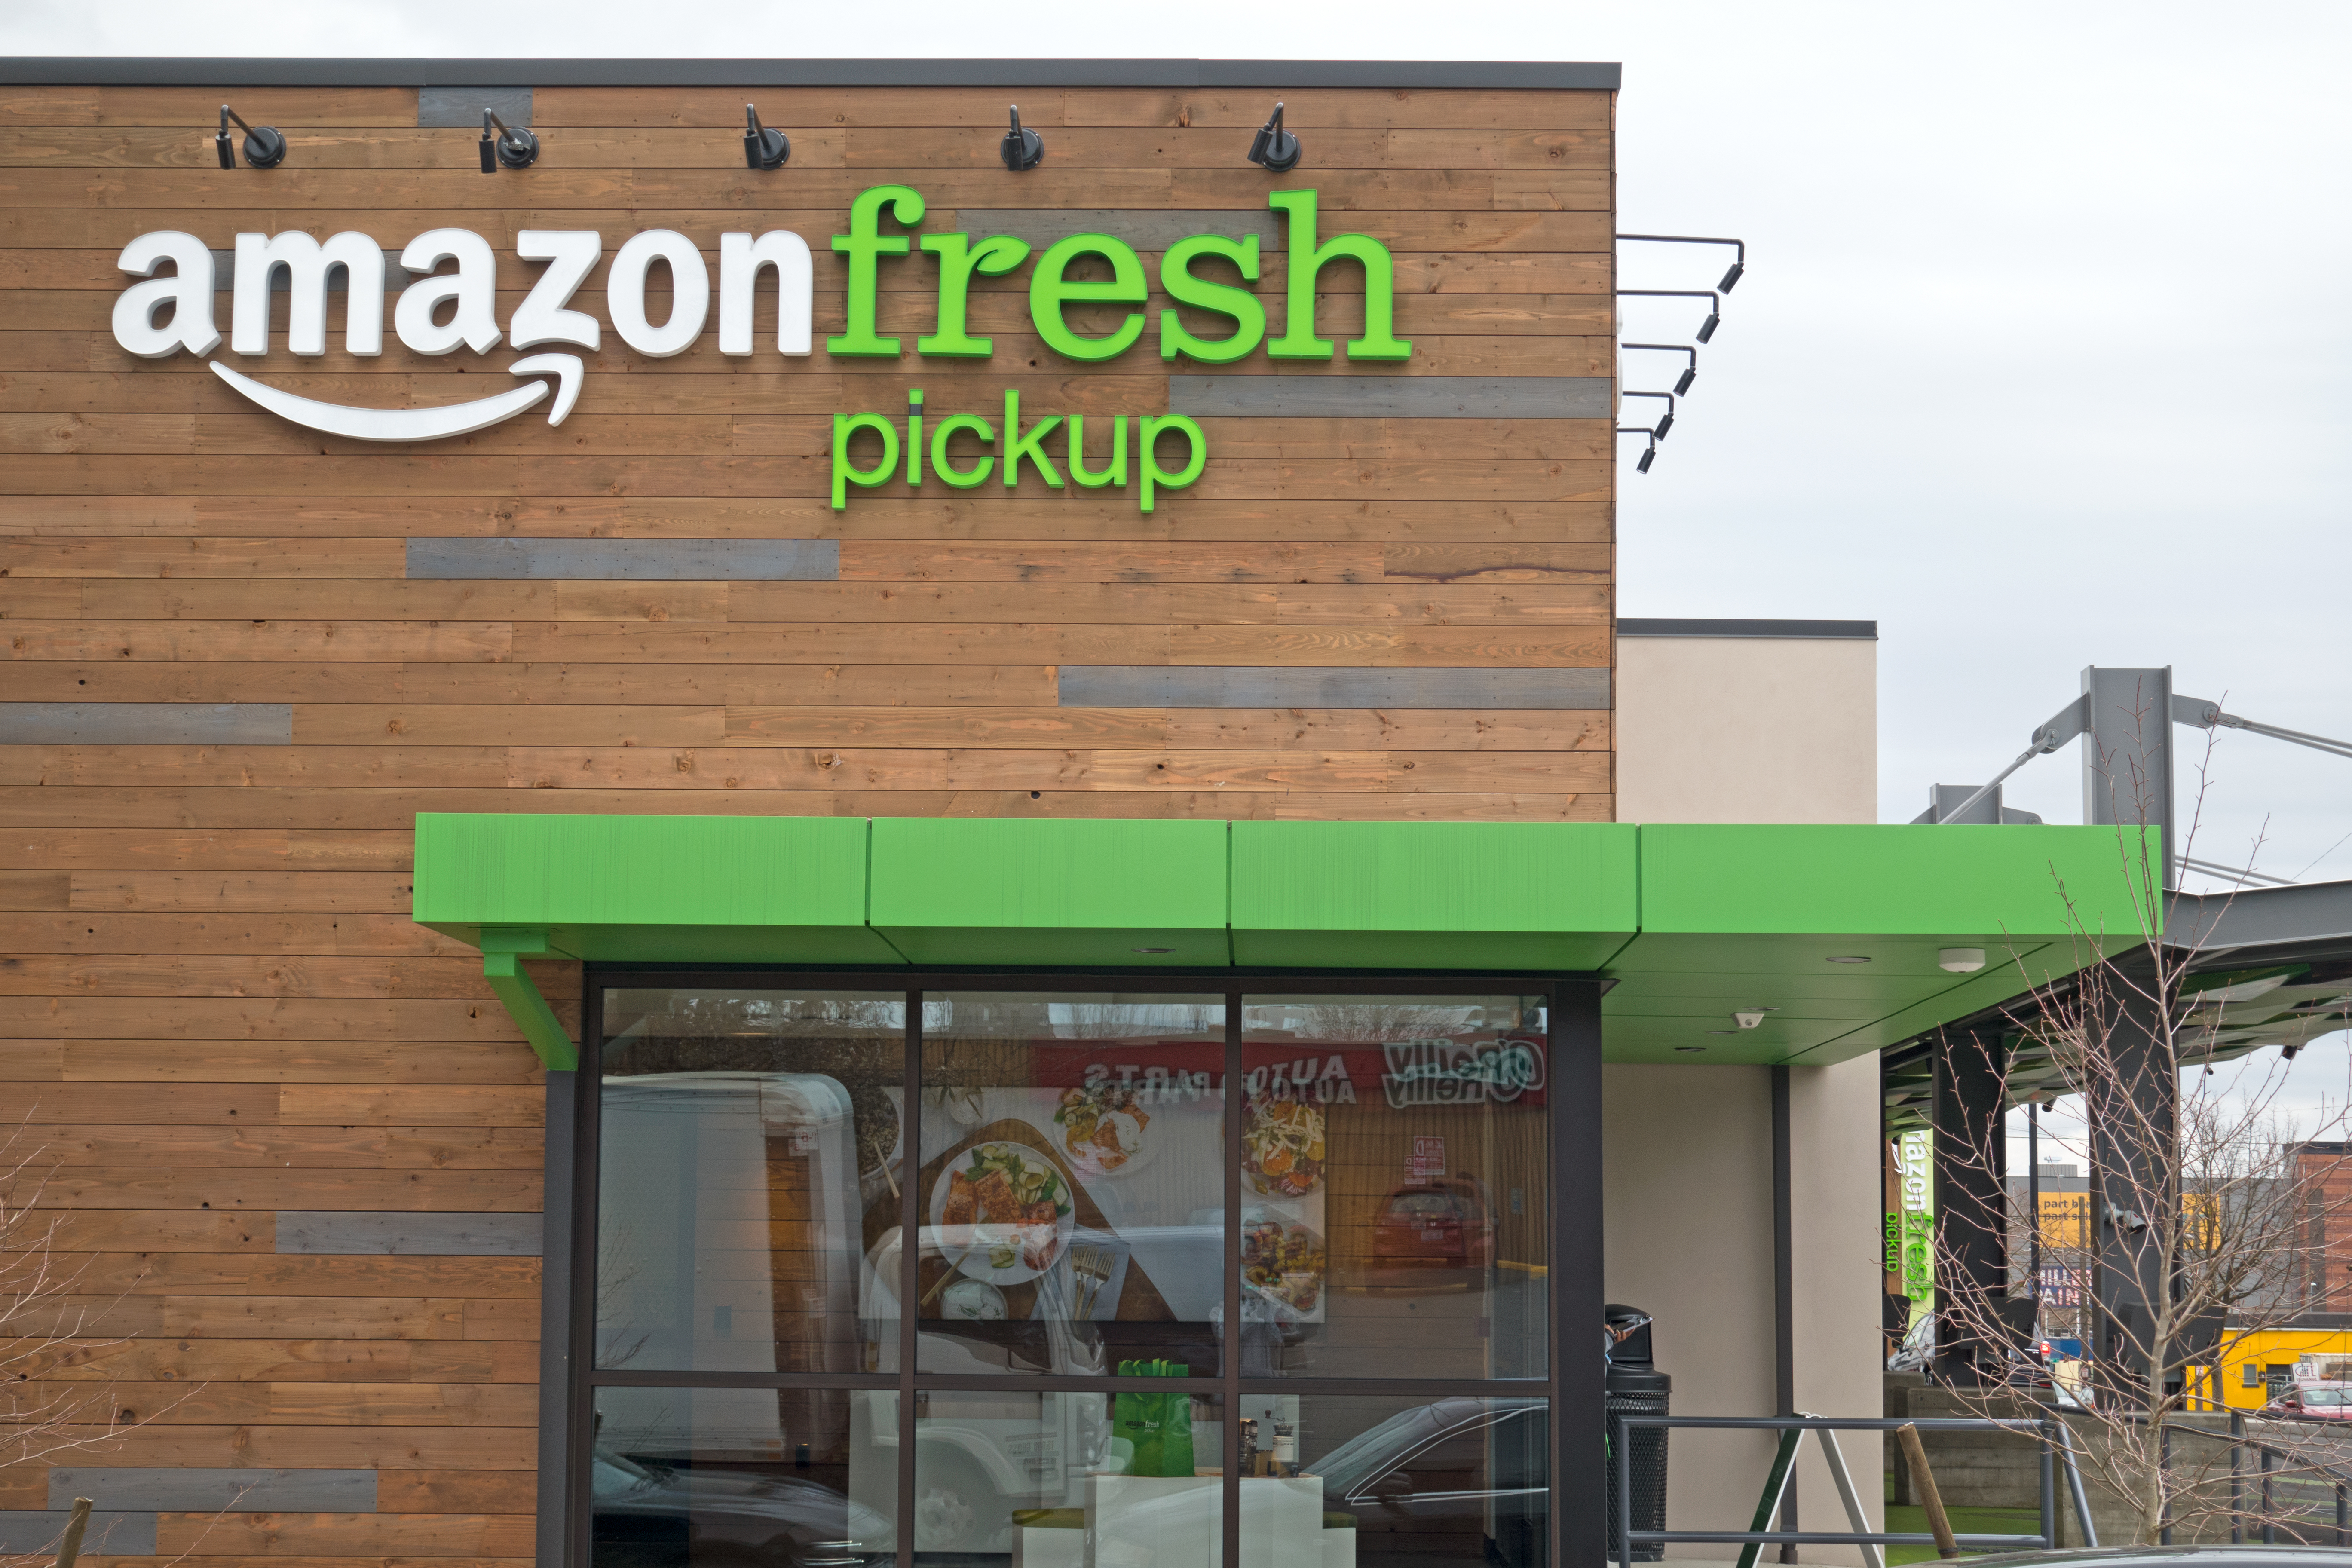 Amazon Fresh allows brands to advertise, similar to Product Display Ads, to increase traffic.